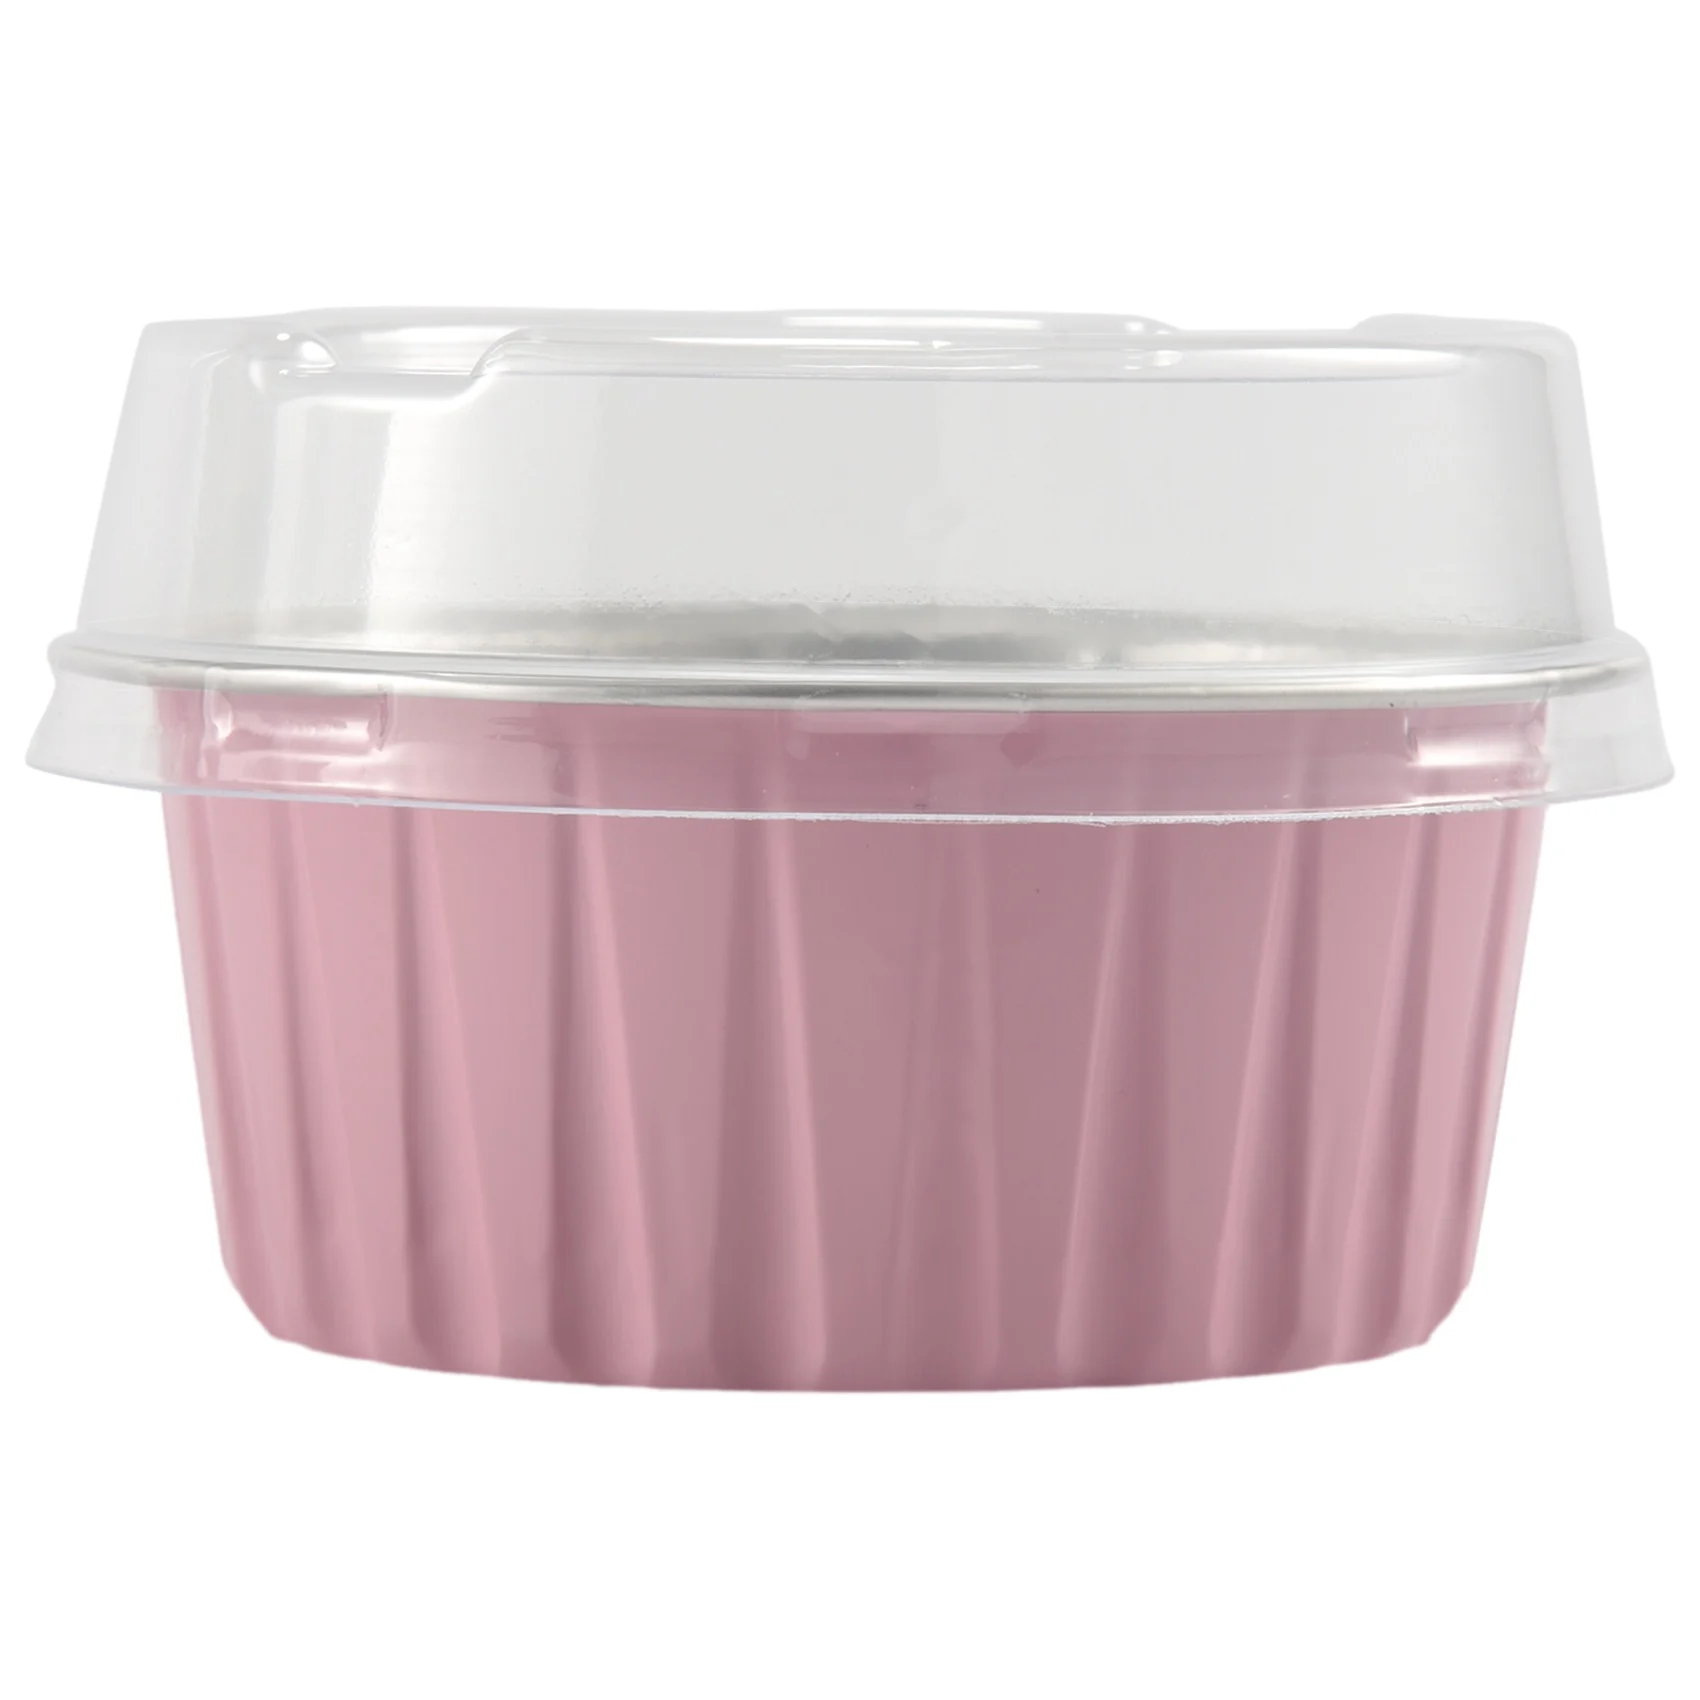 

100Pcs 5Oz 125Ml Disposable Cake Baking Cups Muffin Liners Cups with Lids Aluminum Foil Cupcake Baking Cups-Pink